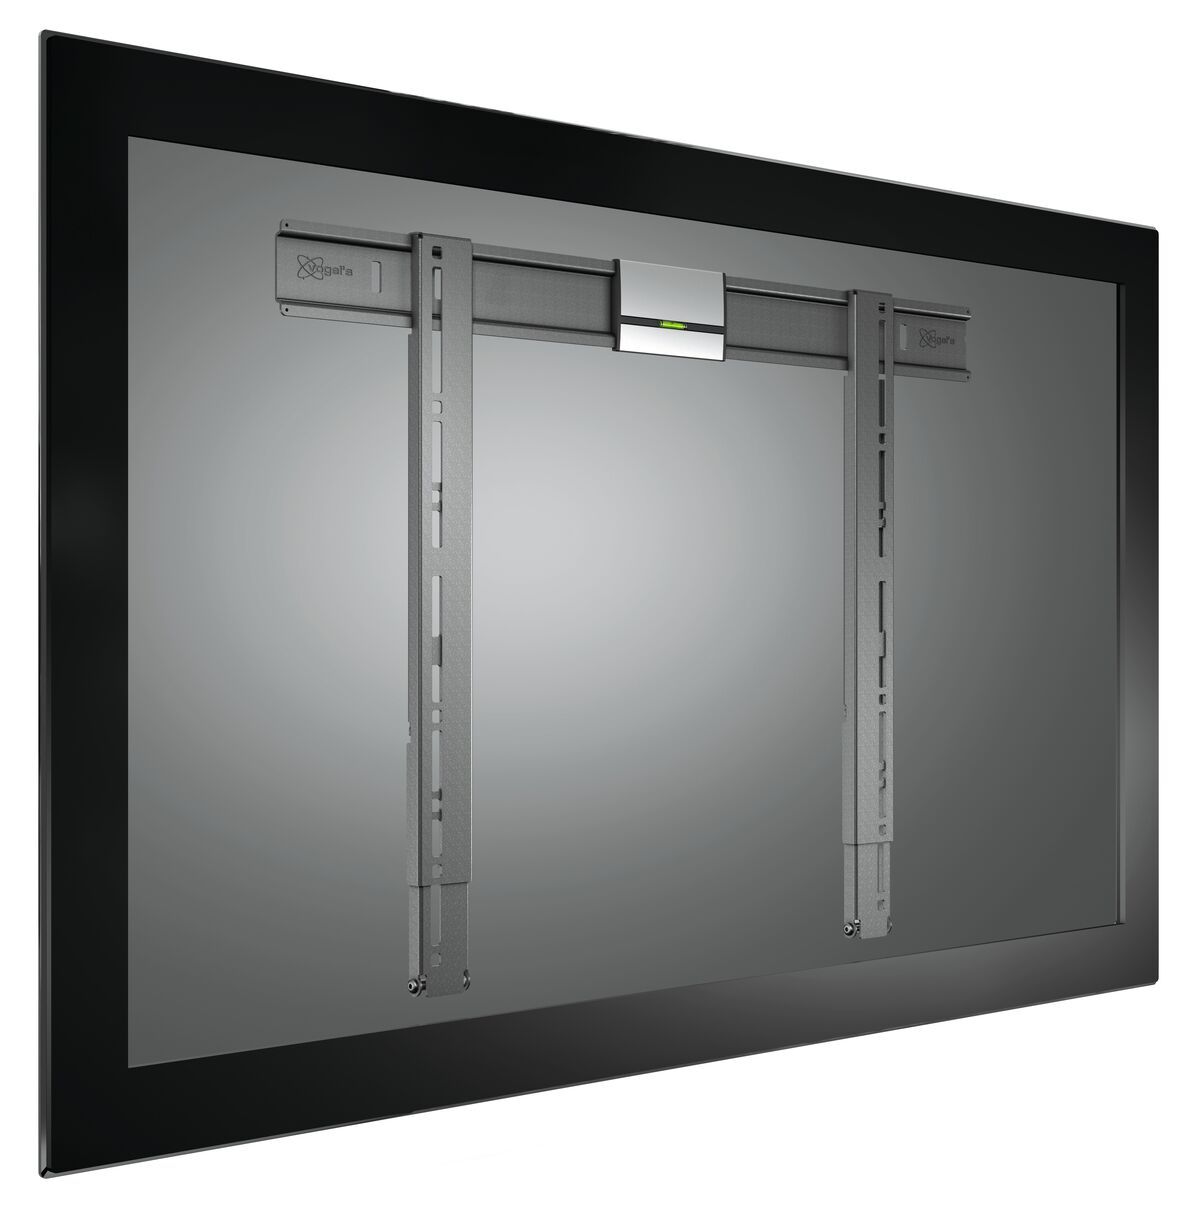 Vogel's THIN 305 UltraThin Fixed TV Wall Mount - Suitable for 40 up to 65 inch TVs up to Application